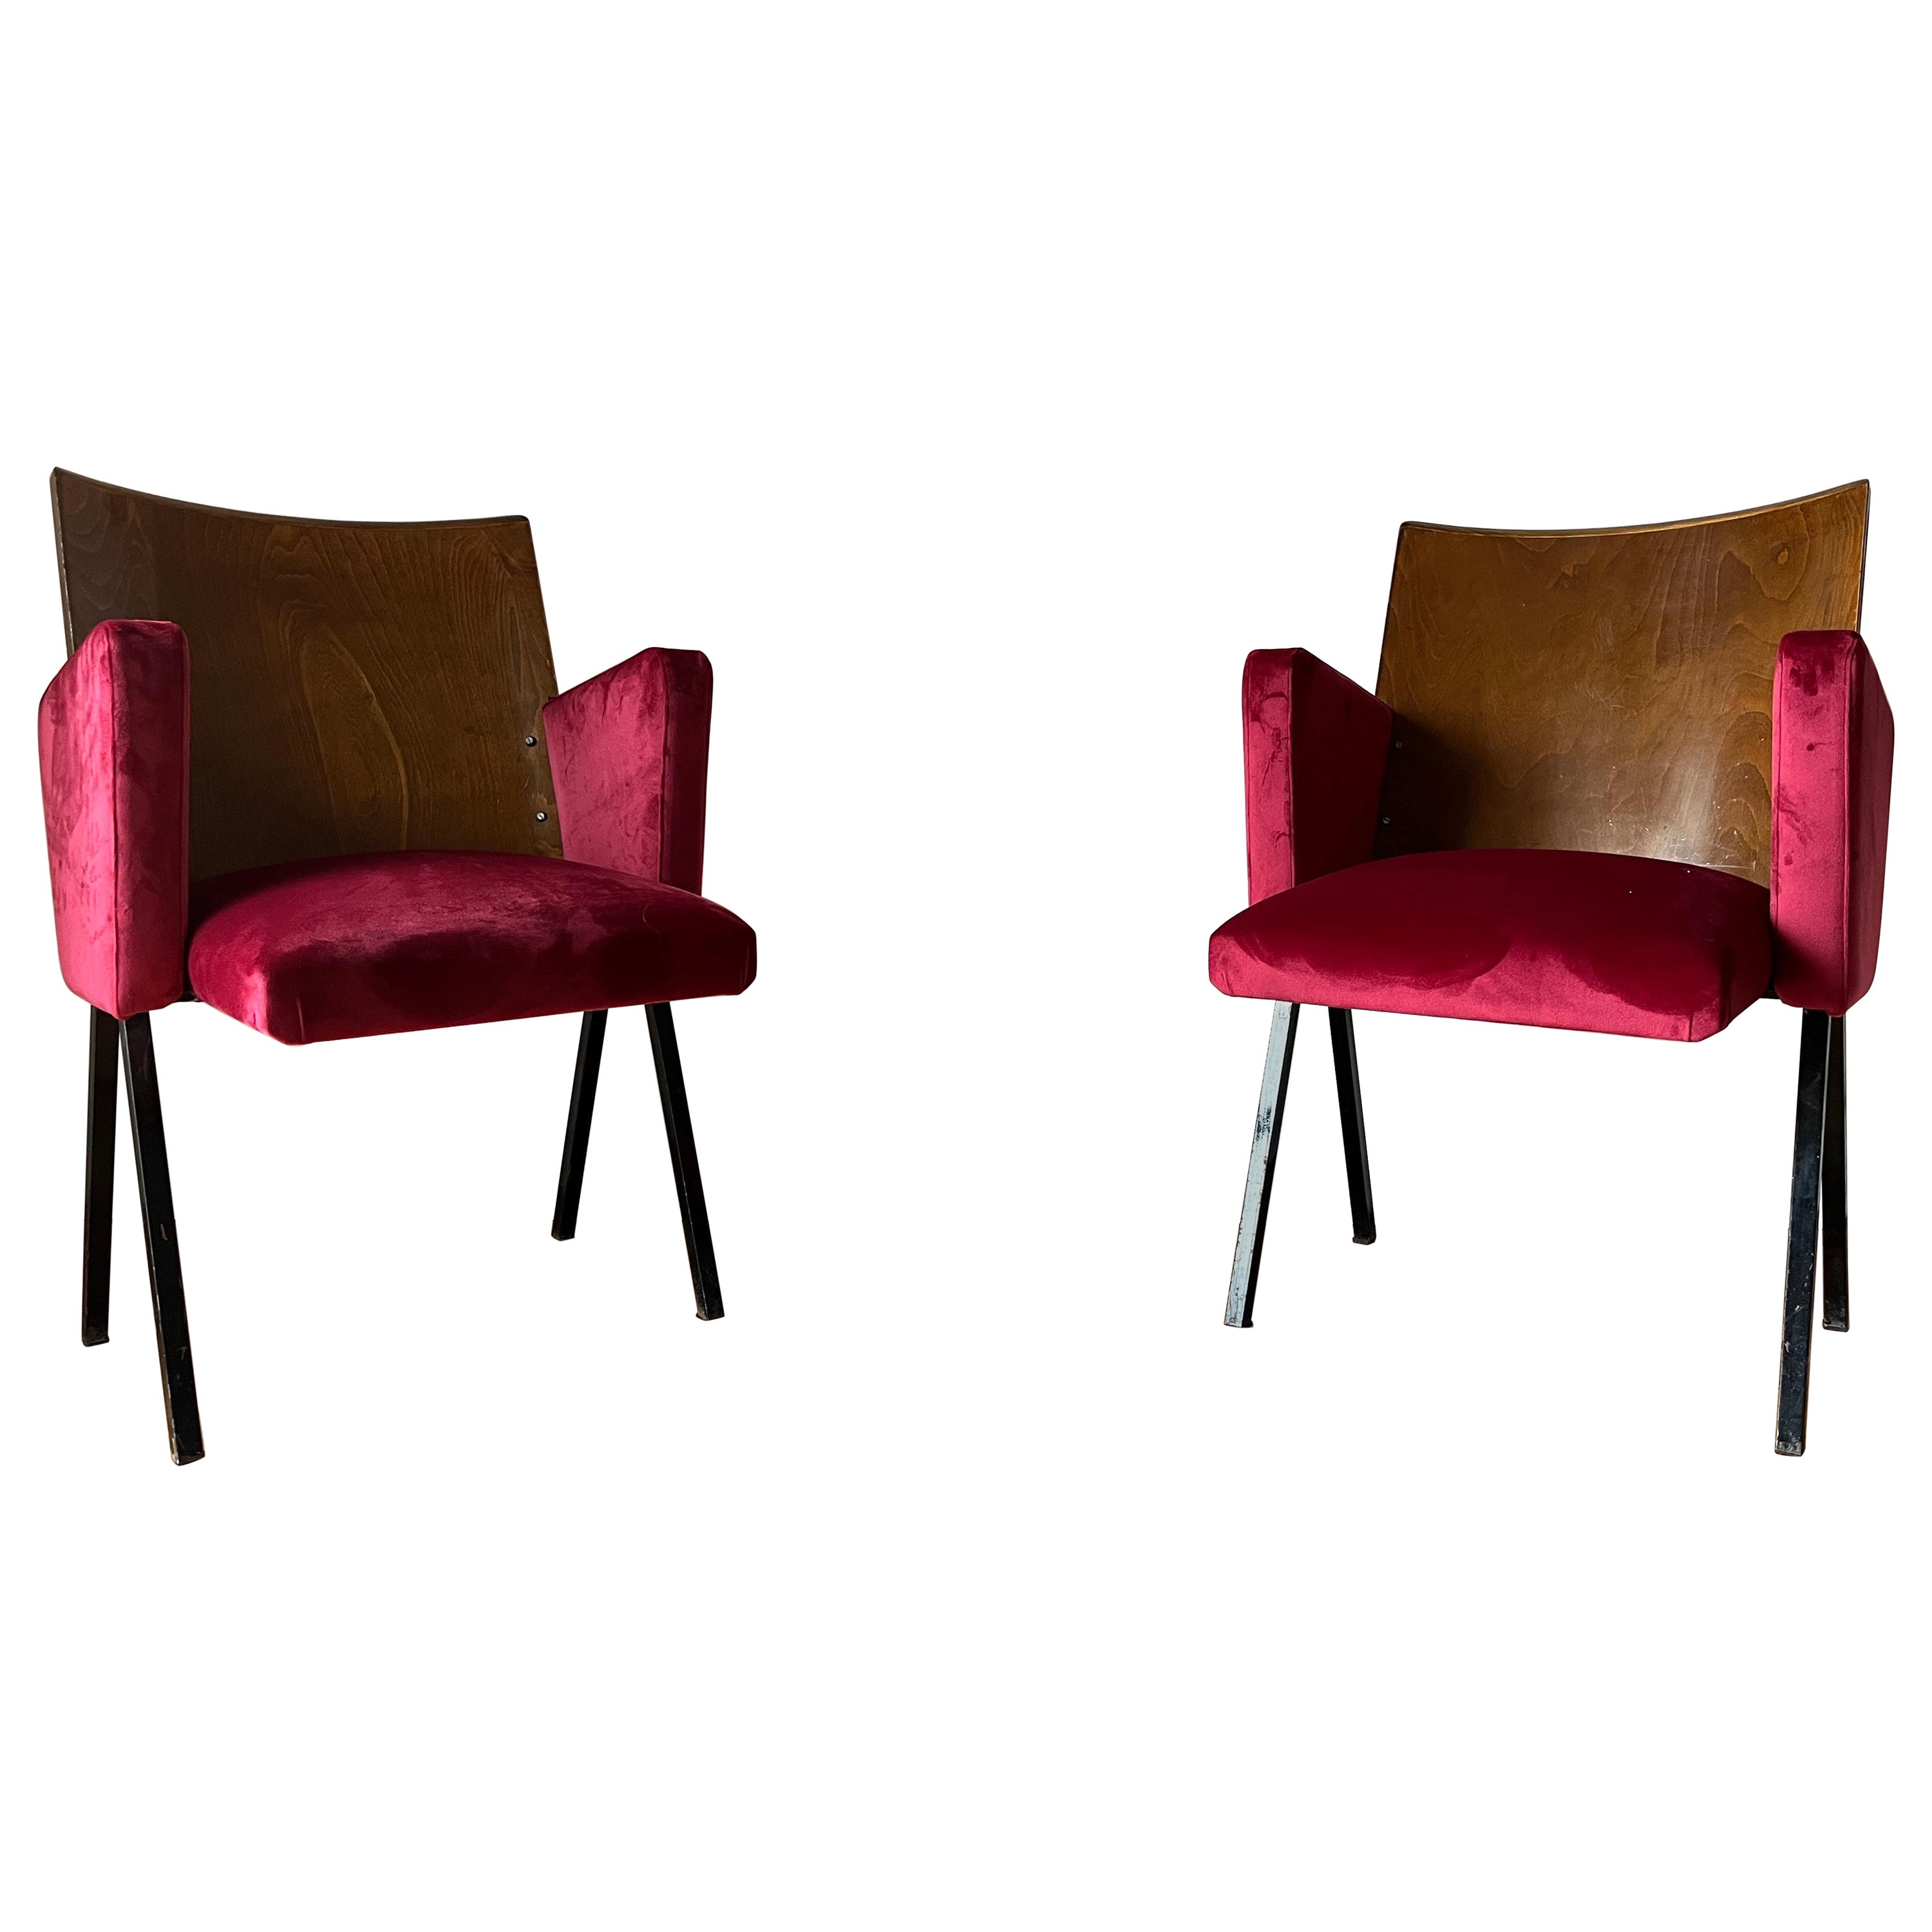 Pair of Theatre Red Chairs, 1950s